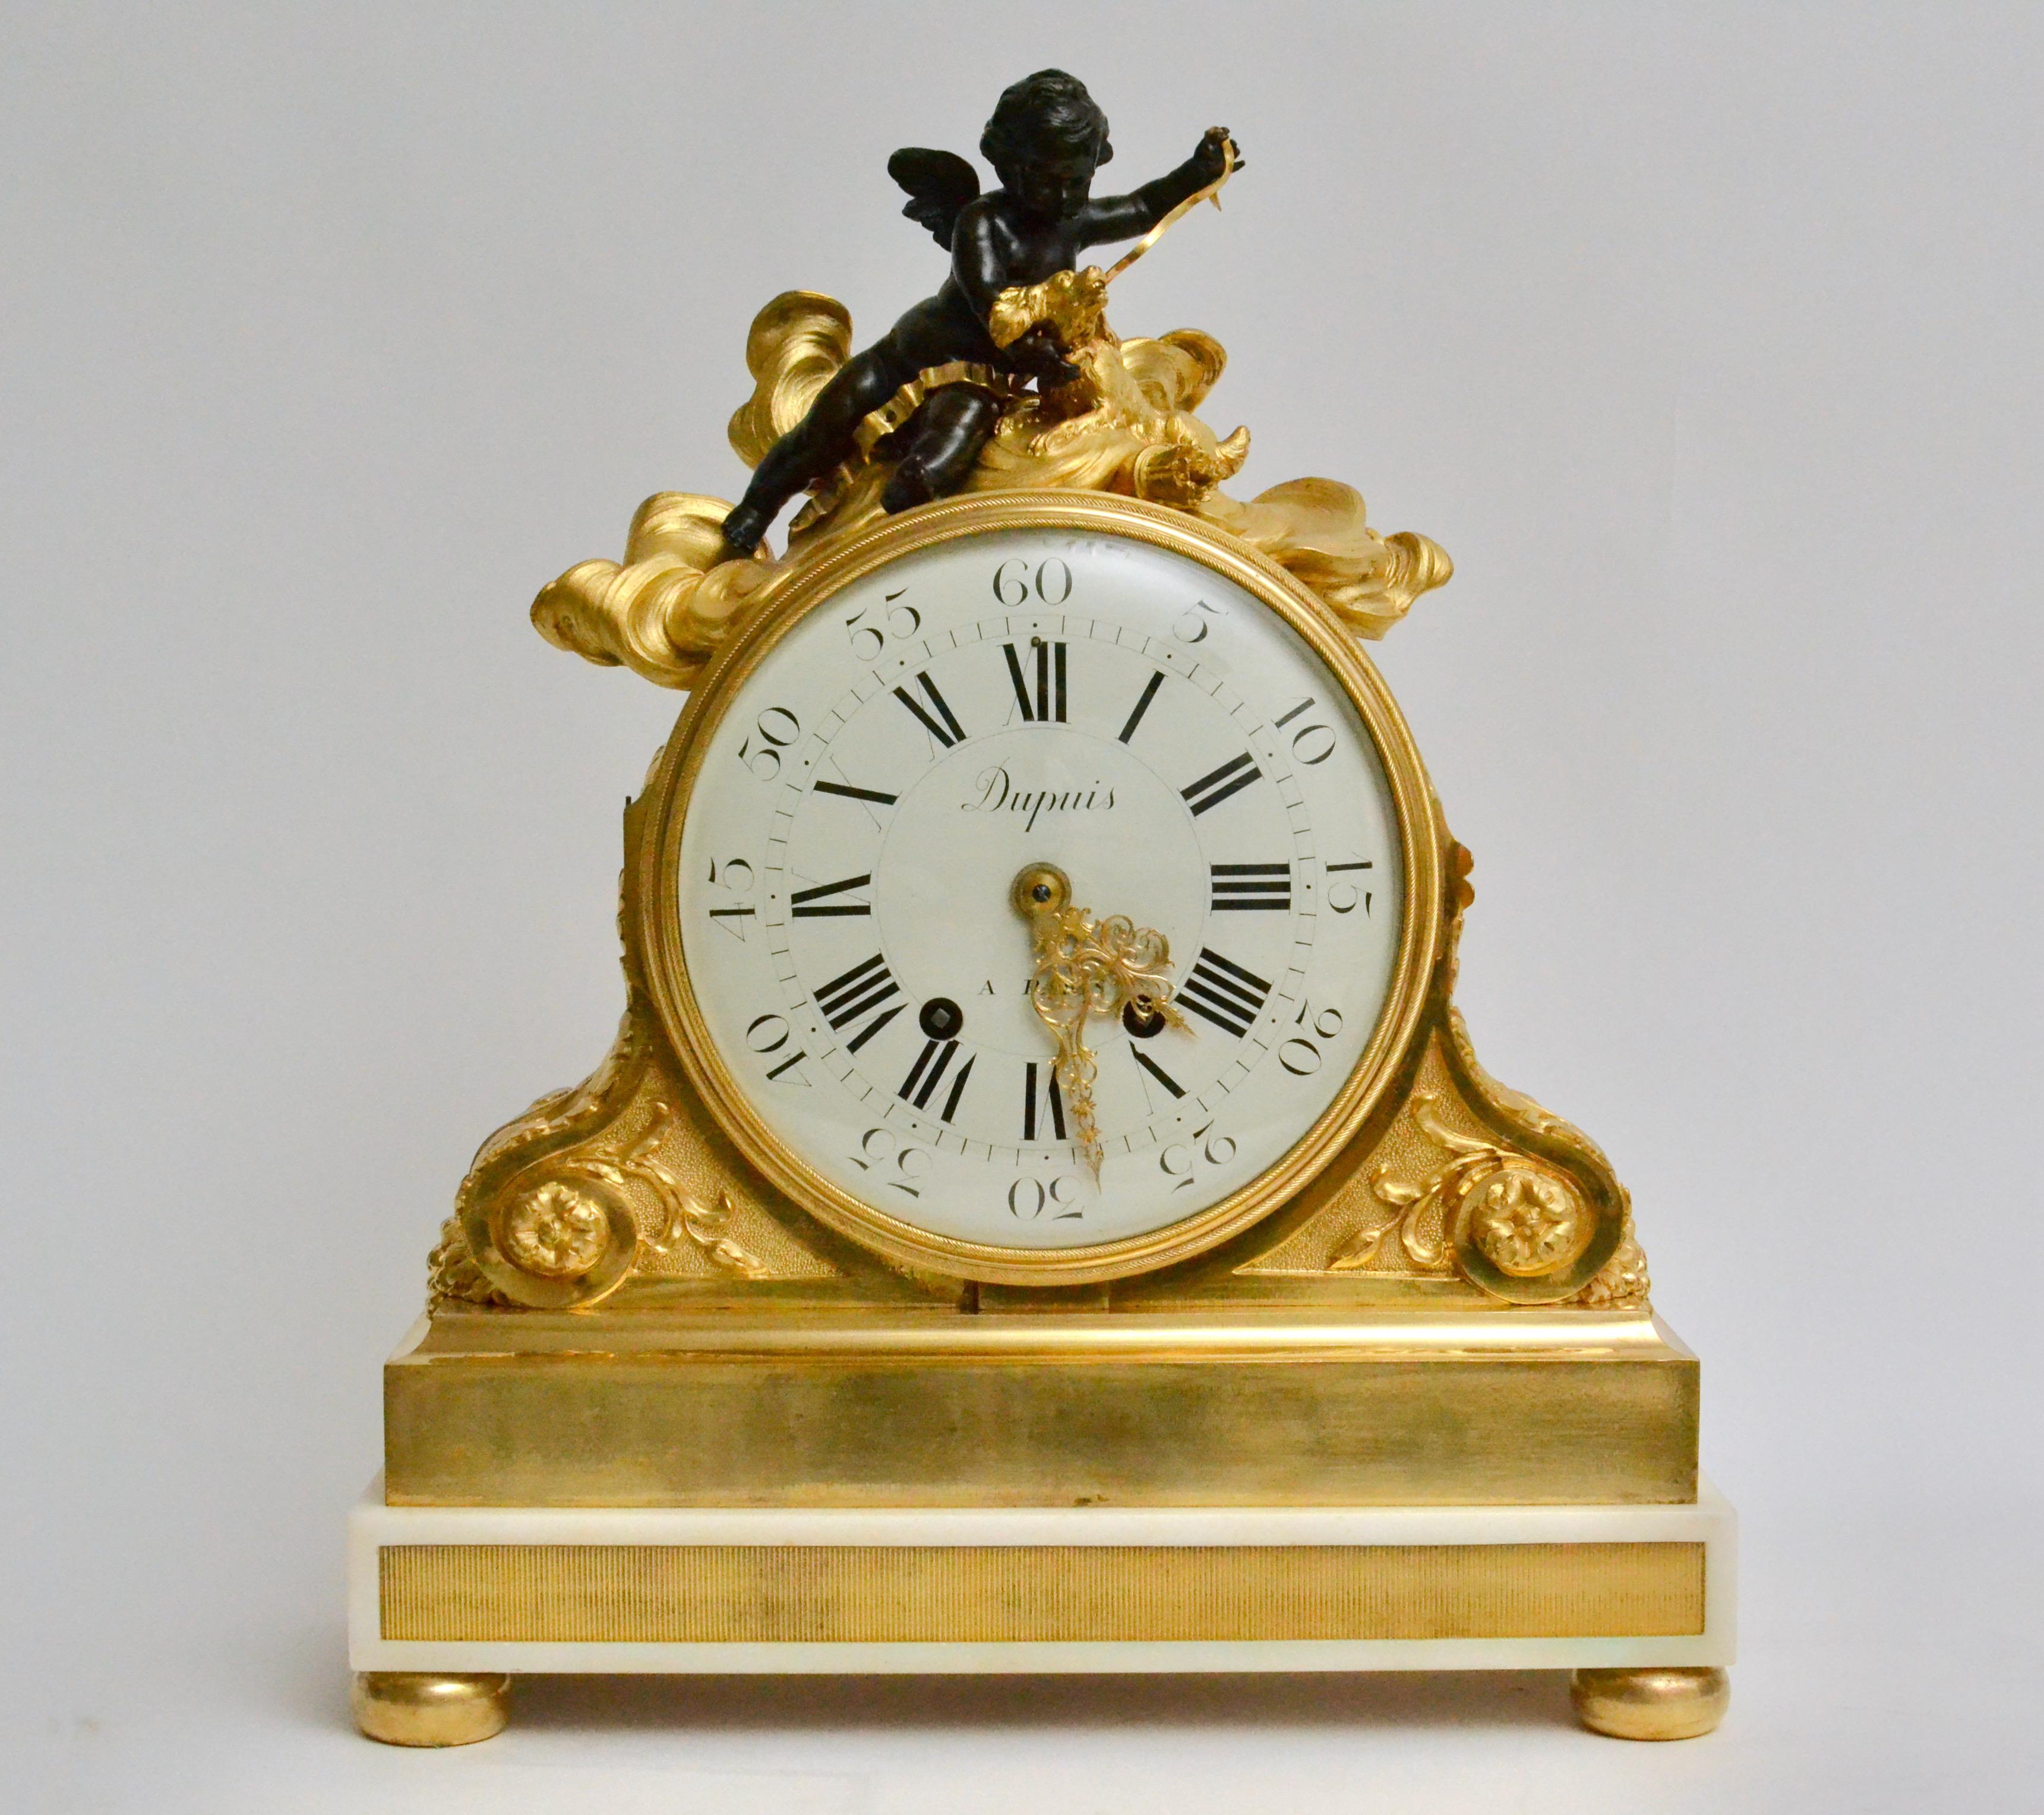 An important and large late 19th century gilt bronze and Carrara marble clock. The gilt bronze and marble clock case signed by Escalier de Cristal, Paris and clockwork by Dupuis a Paris. With inscription: 